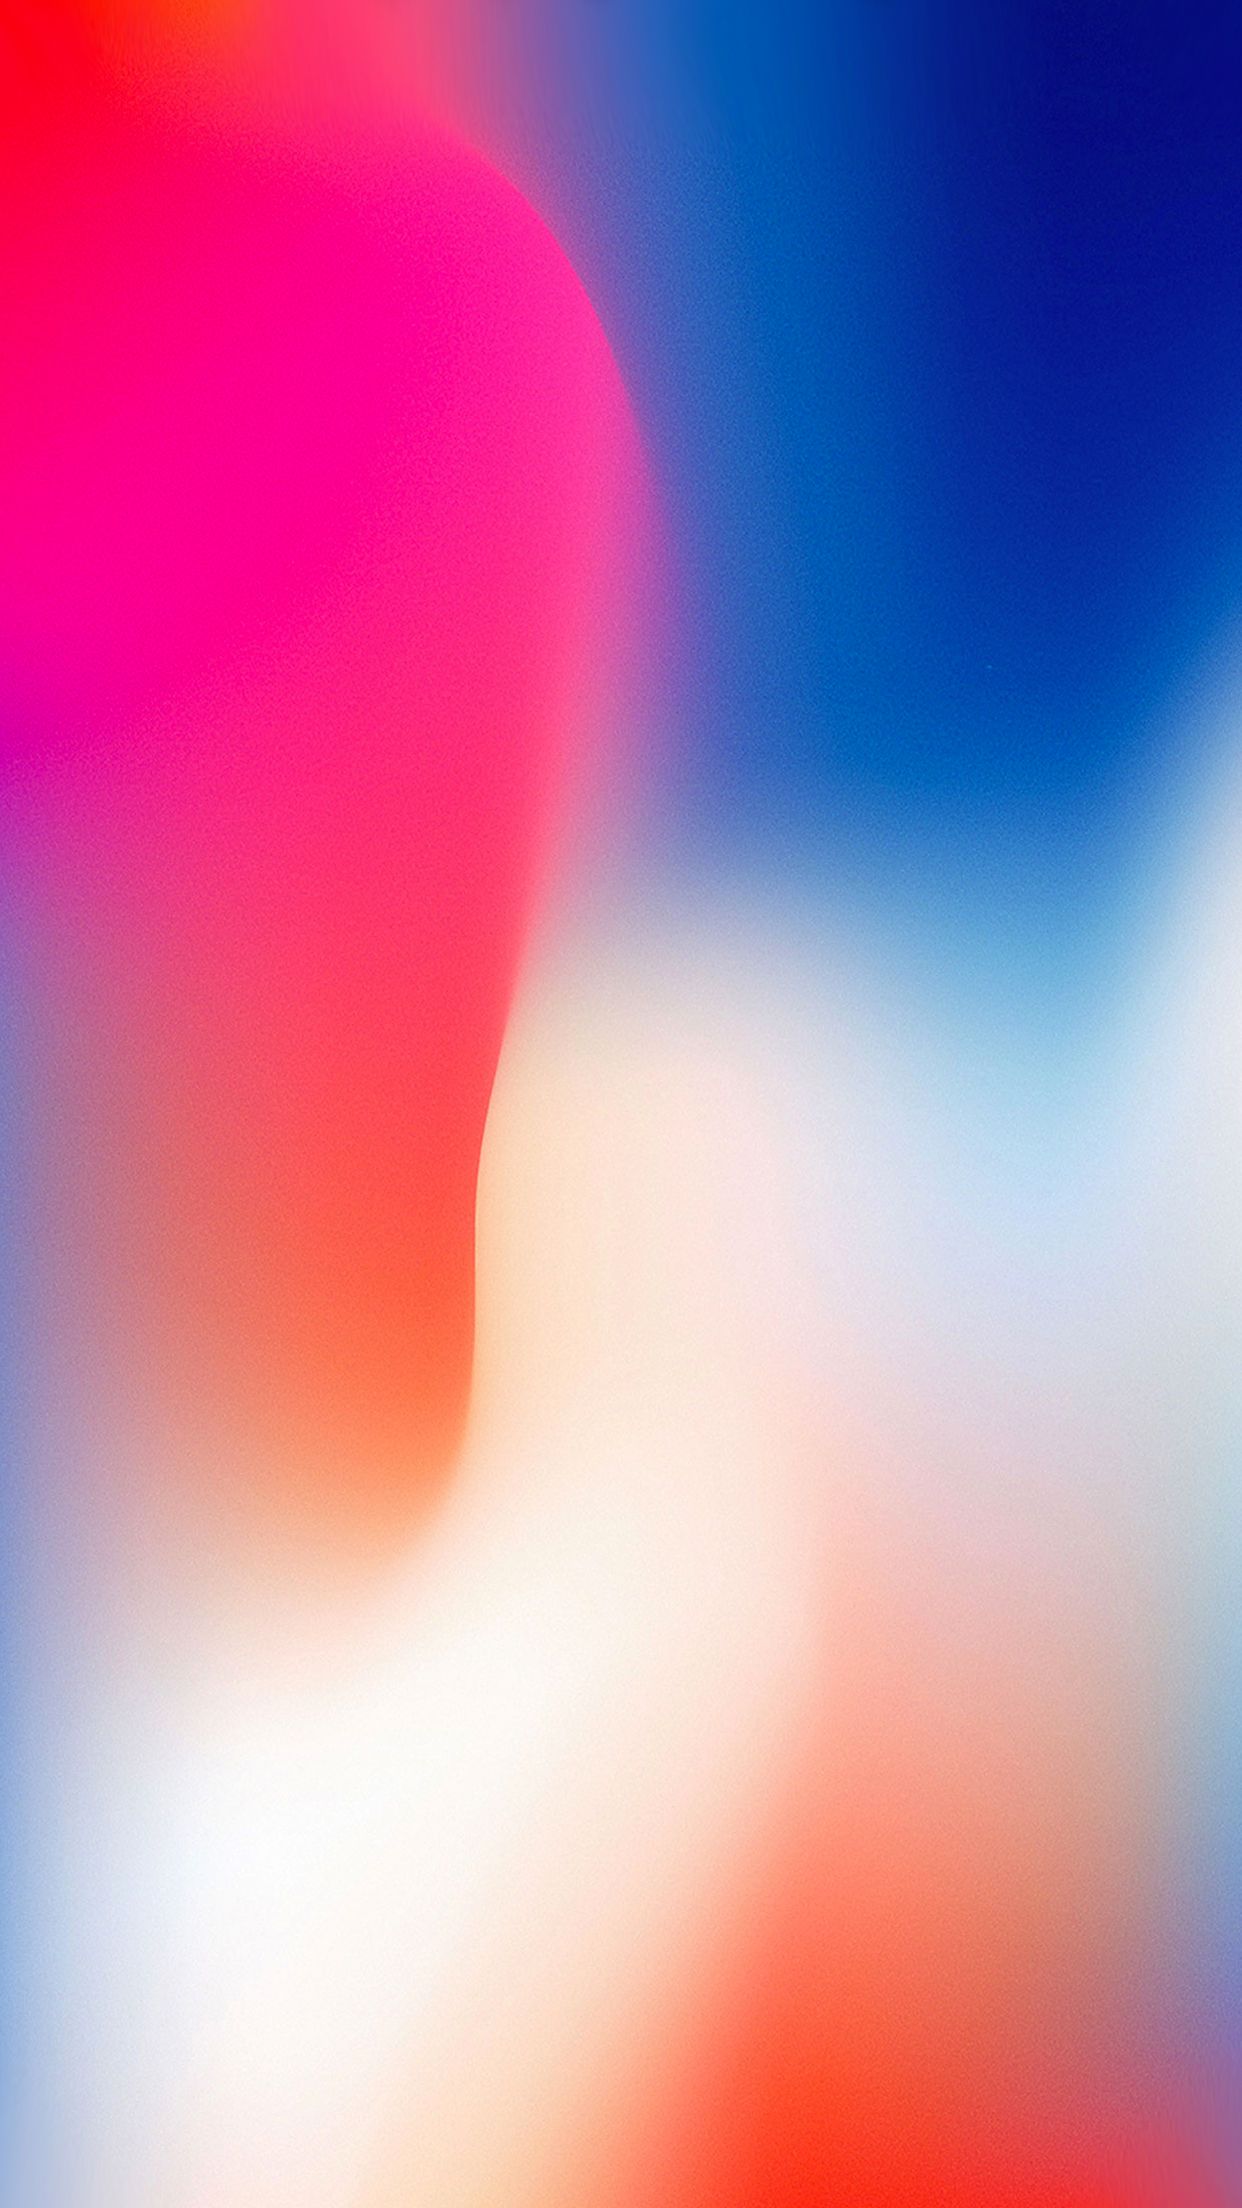 Top 999+ Iphone X Wallpaper Full HD, 4K✓Free to Use